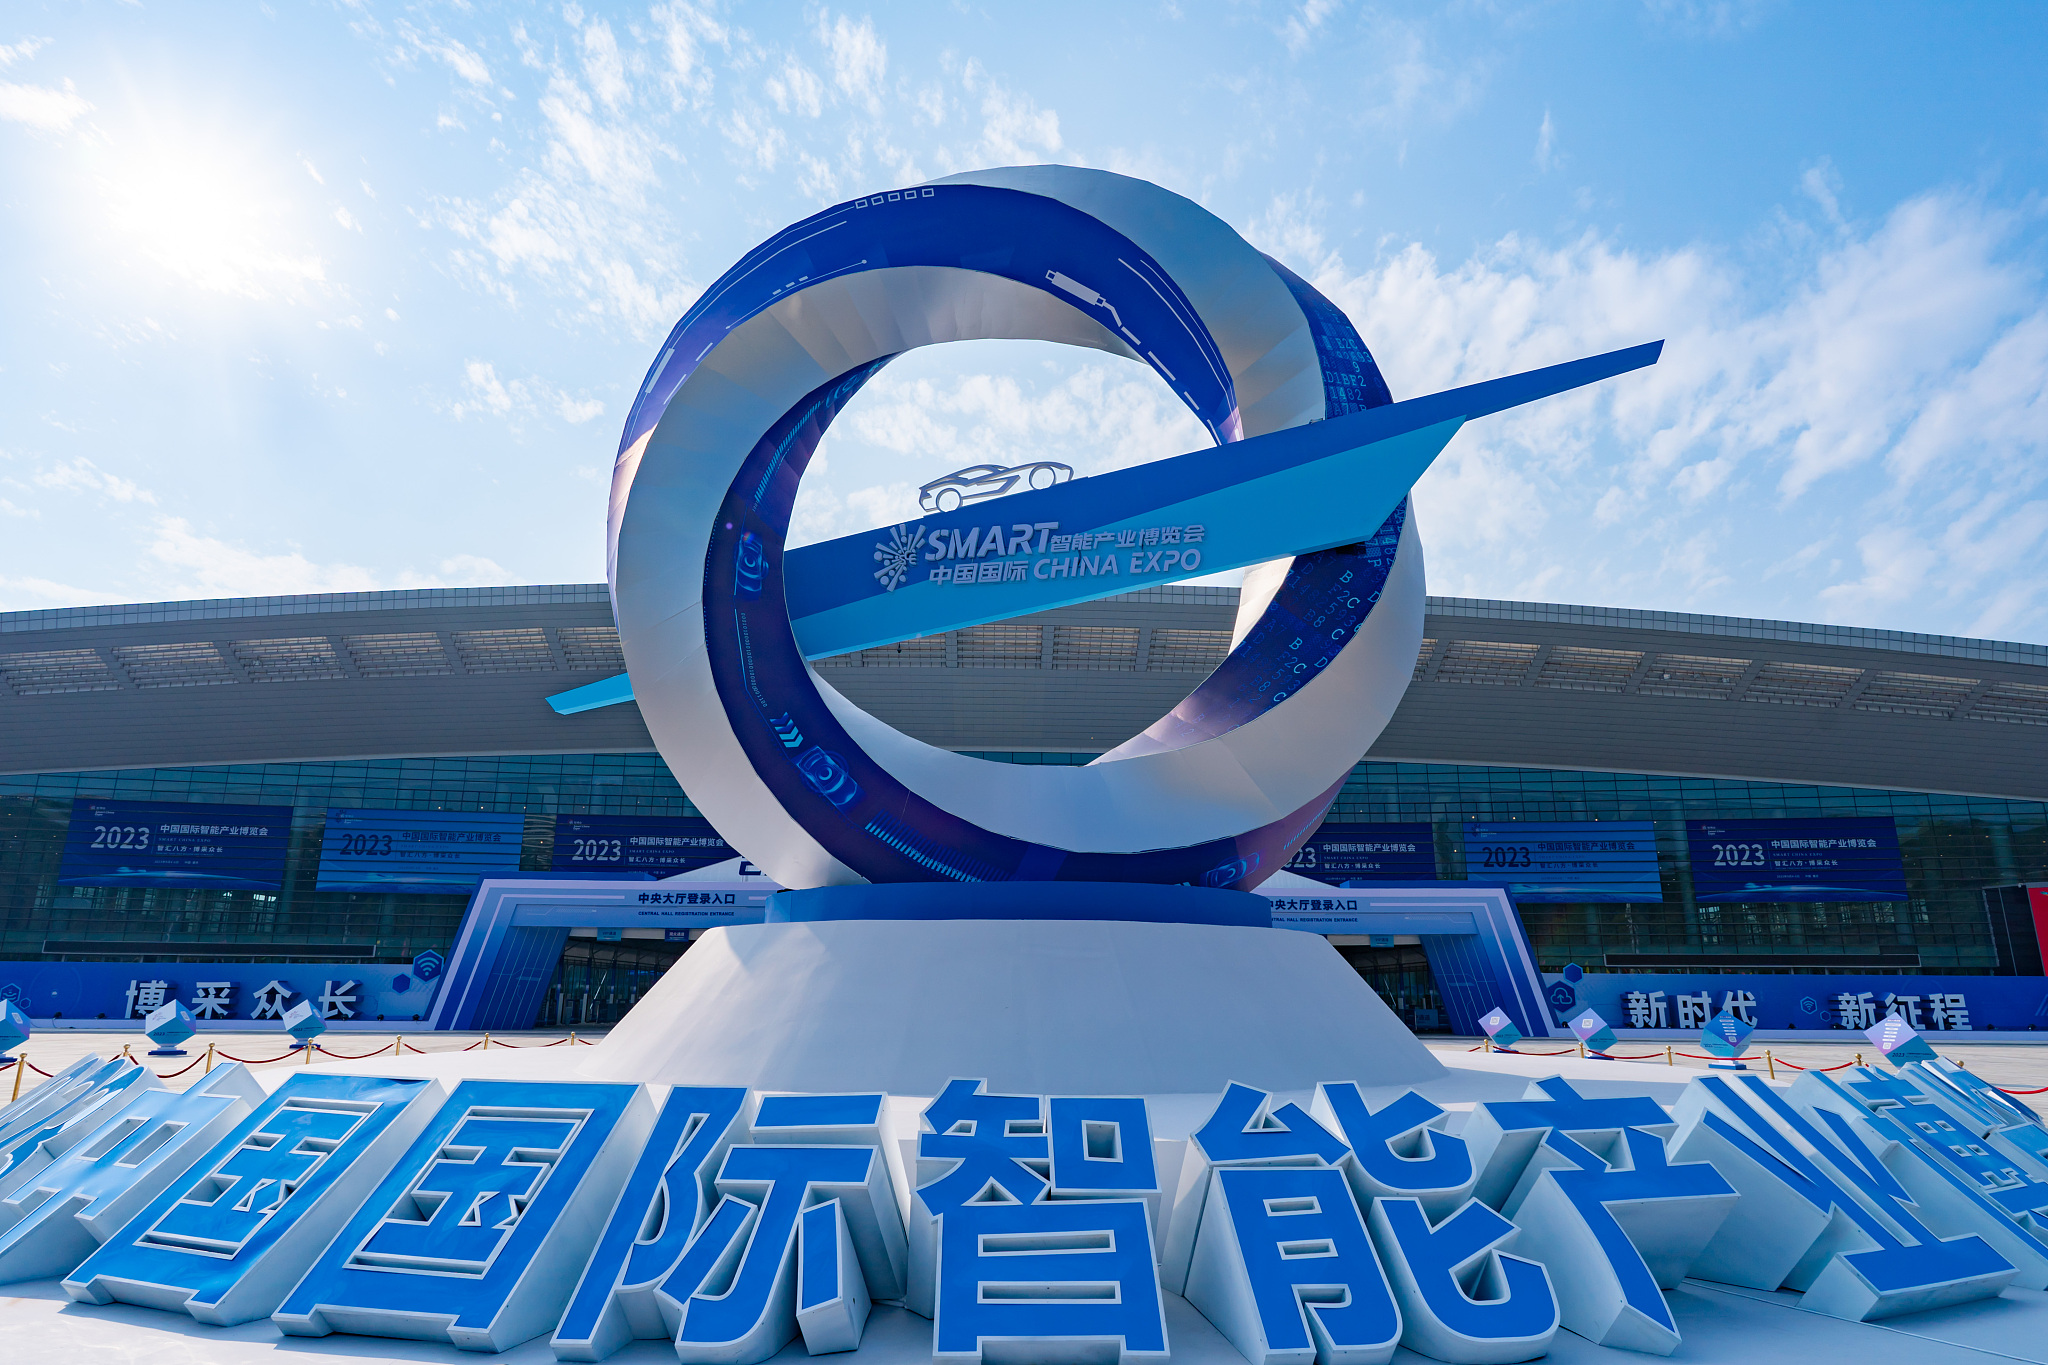 The sign of the Smart China Expo in Chongqing Municipality, southwest China, September 2, 2023. /CFP